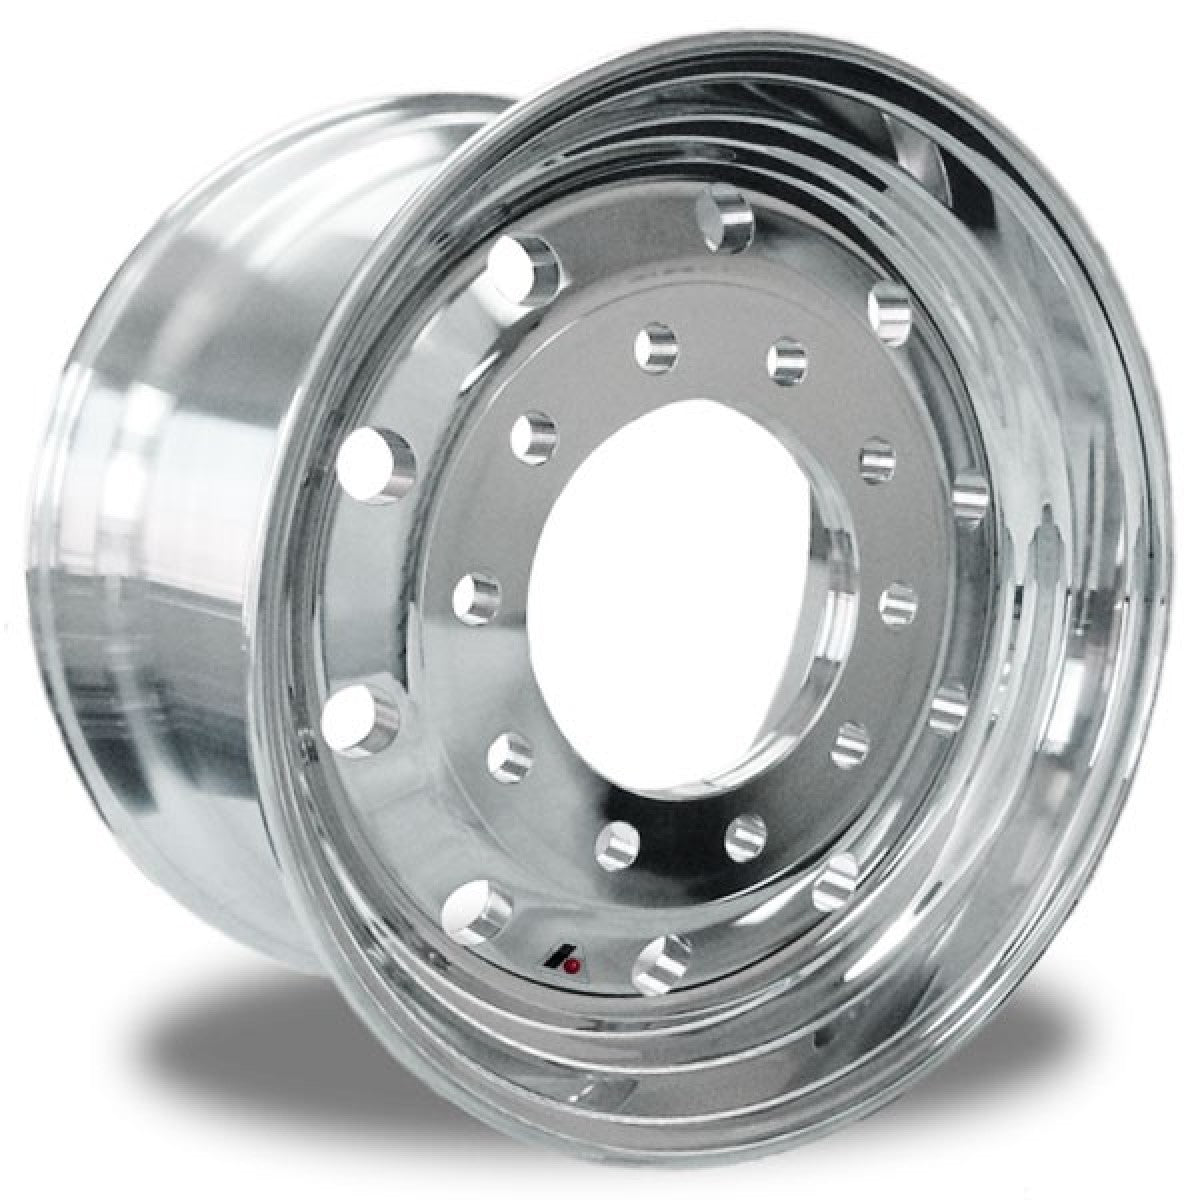 Accuride 22.5 x 12.25" Aluminum High Polished Wheel 2.75" offset